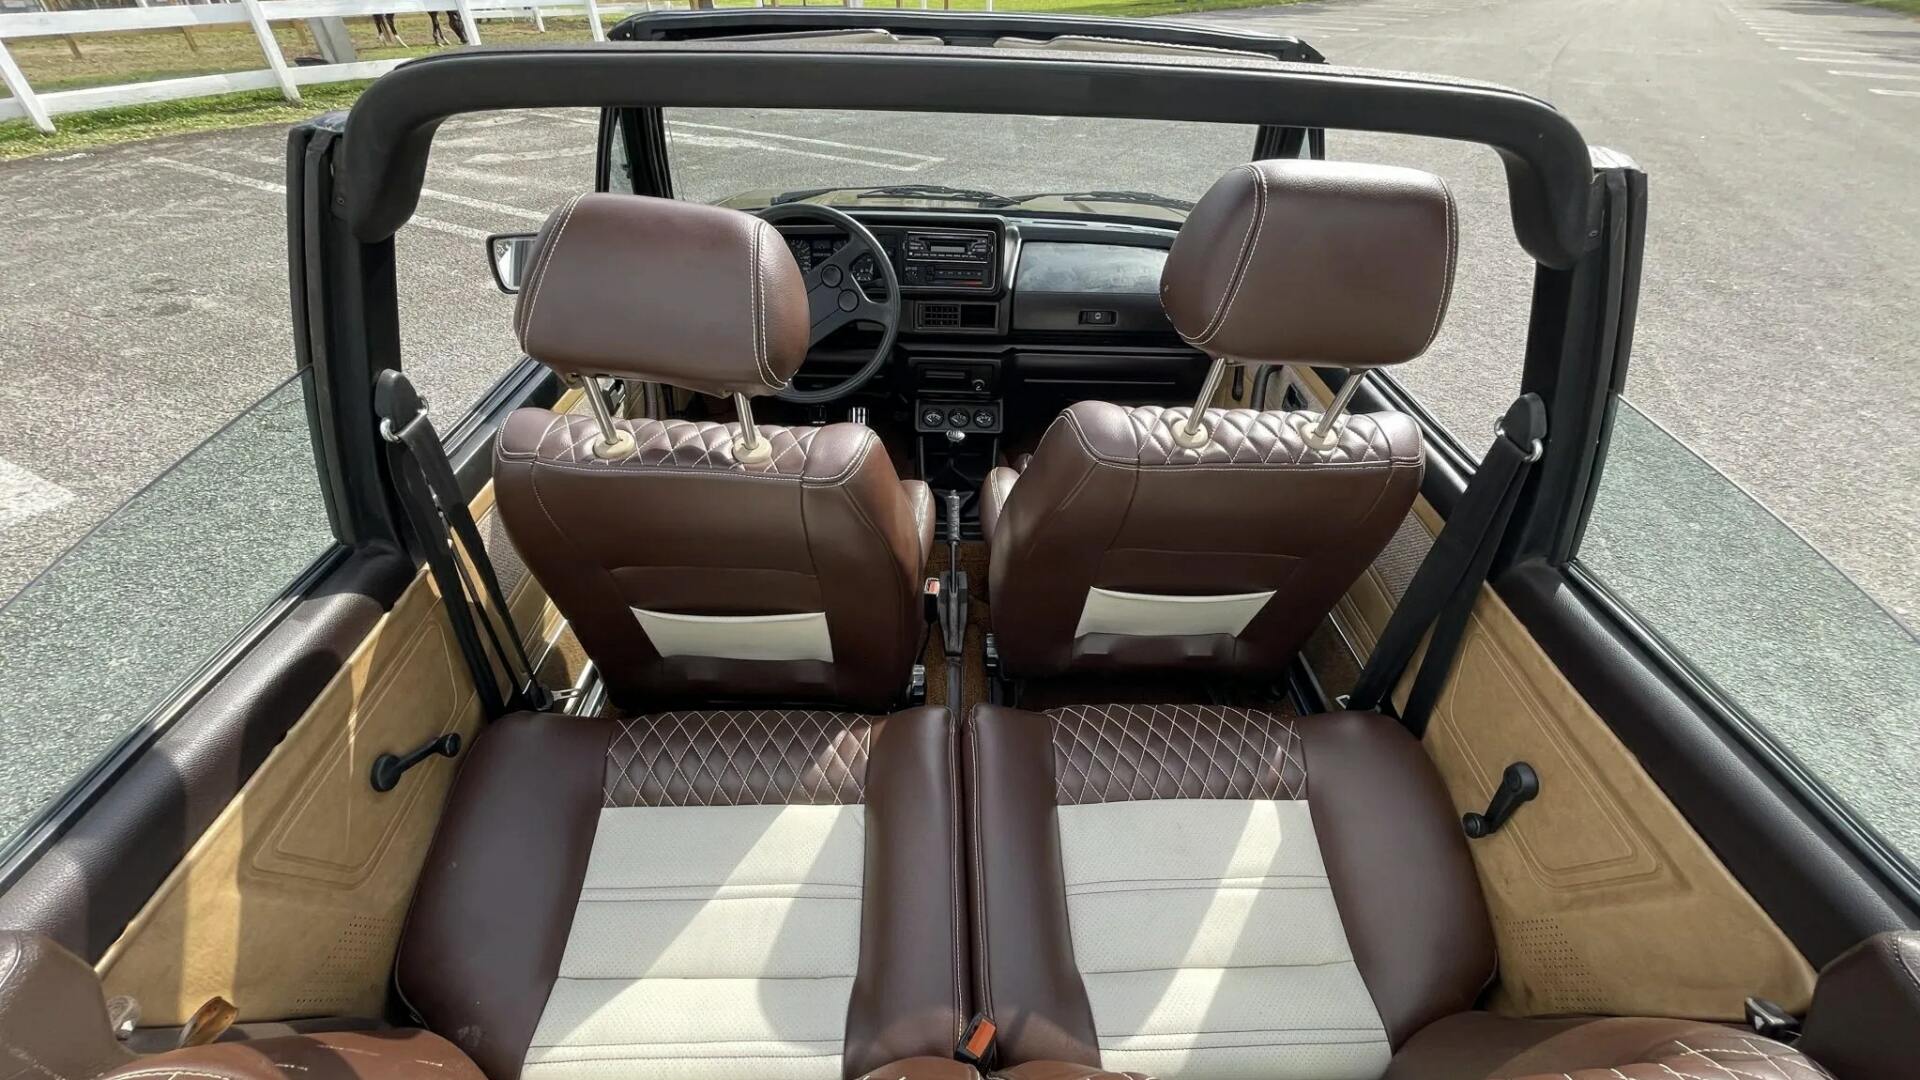 An Aerial View Of The Interior Of The 1984 VW Rabbit Convertible (Credits Bring A Trailer)